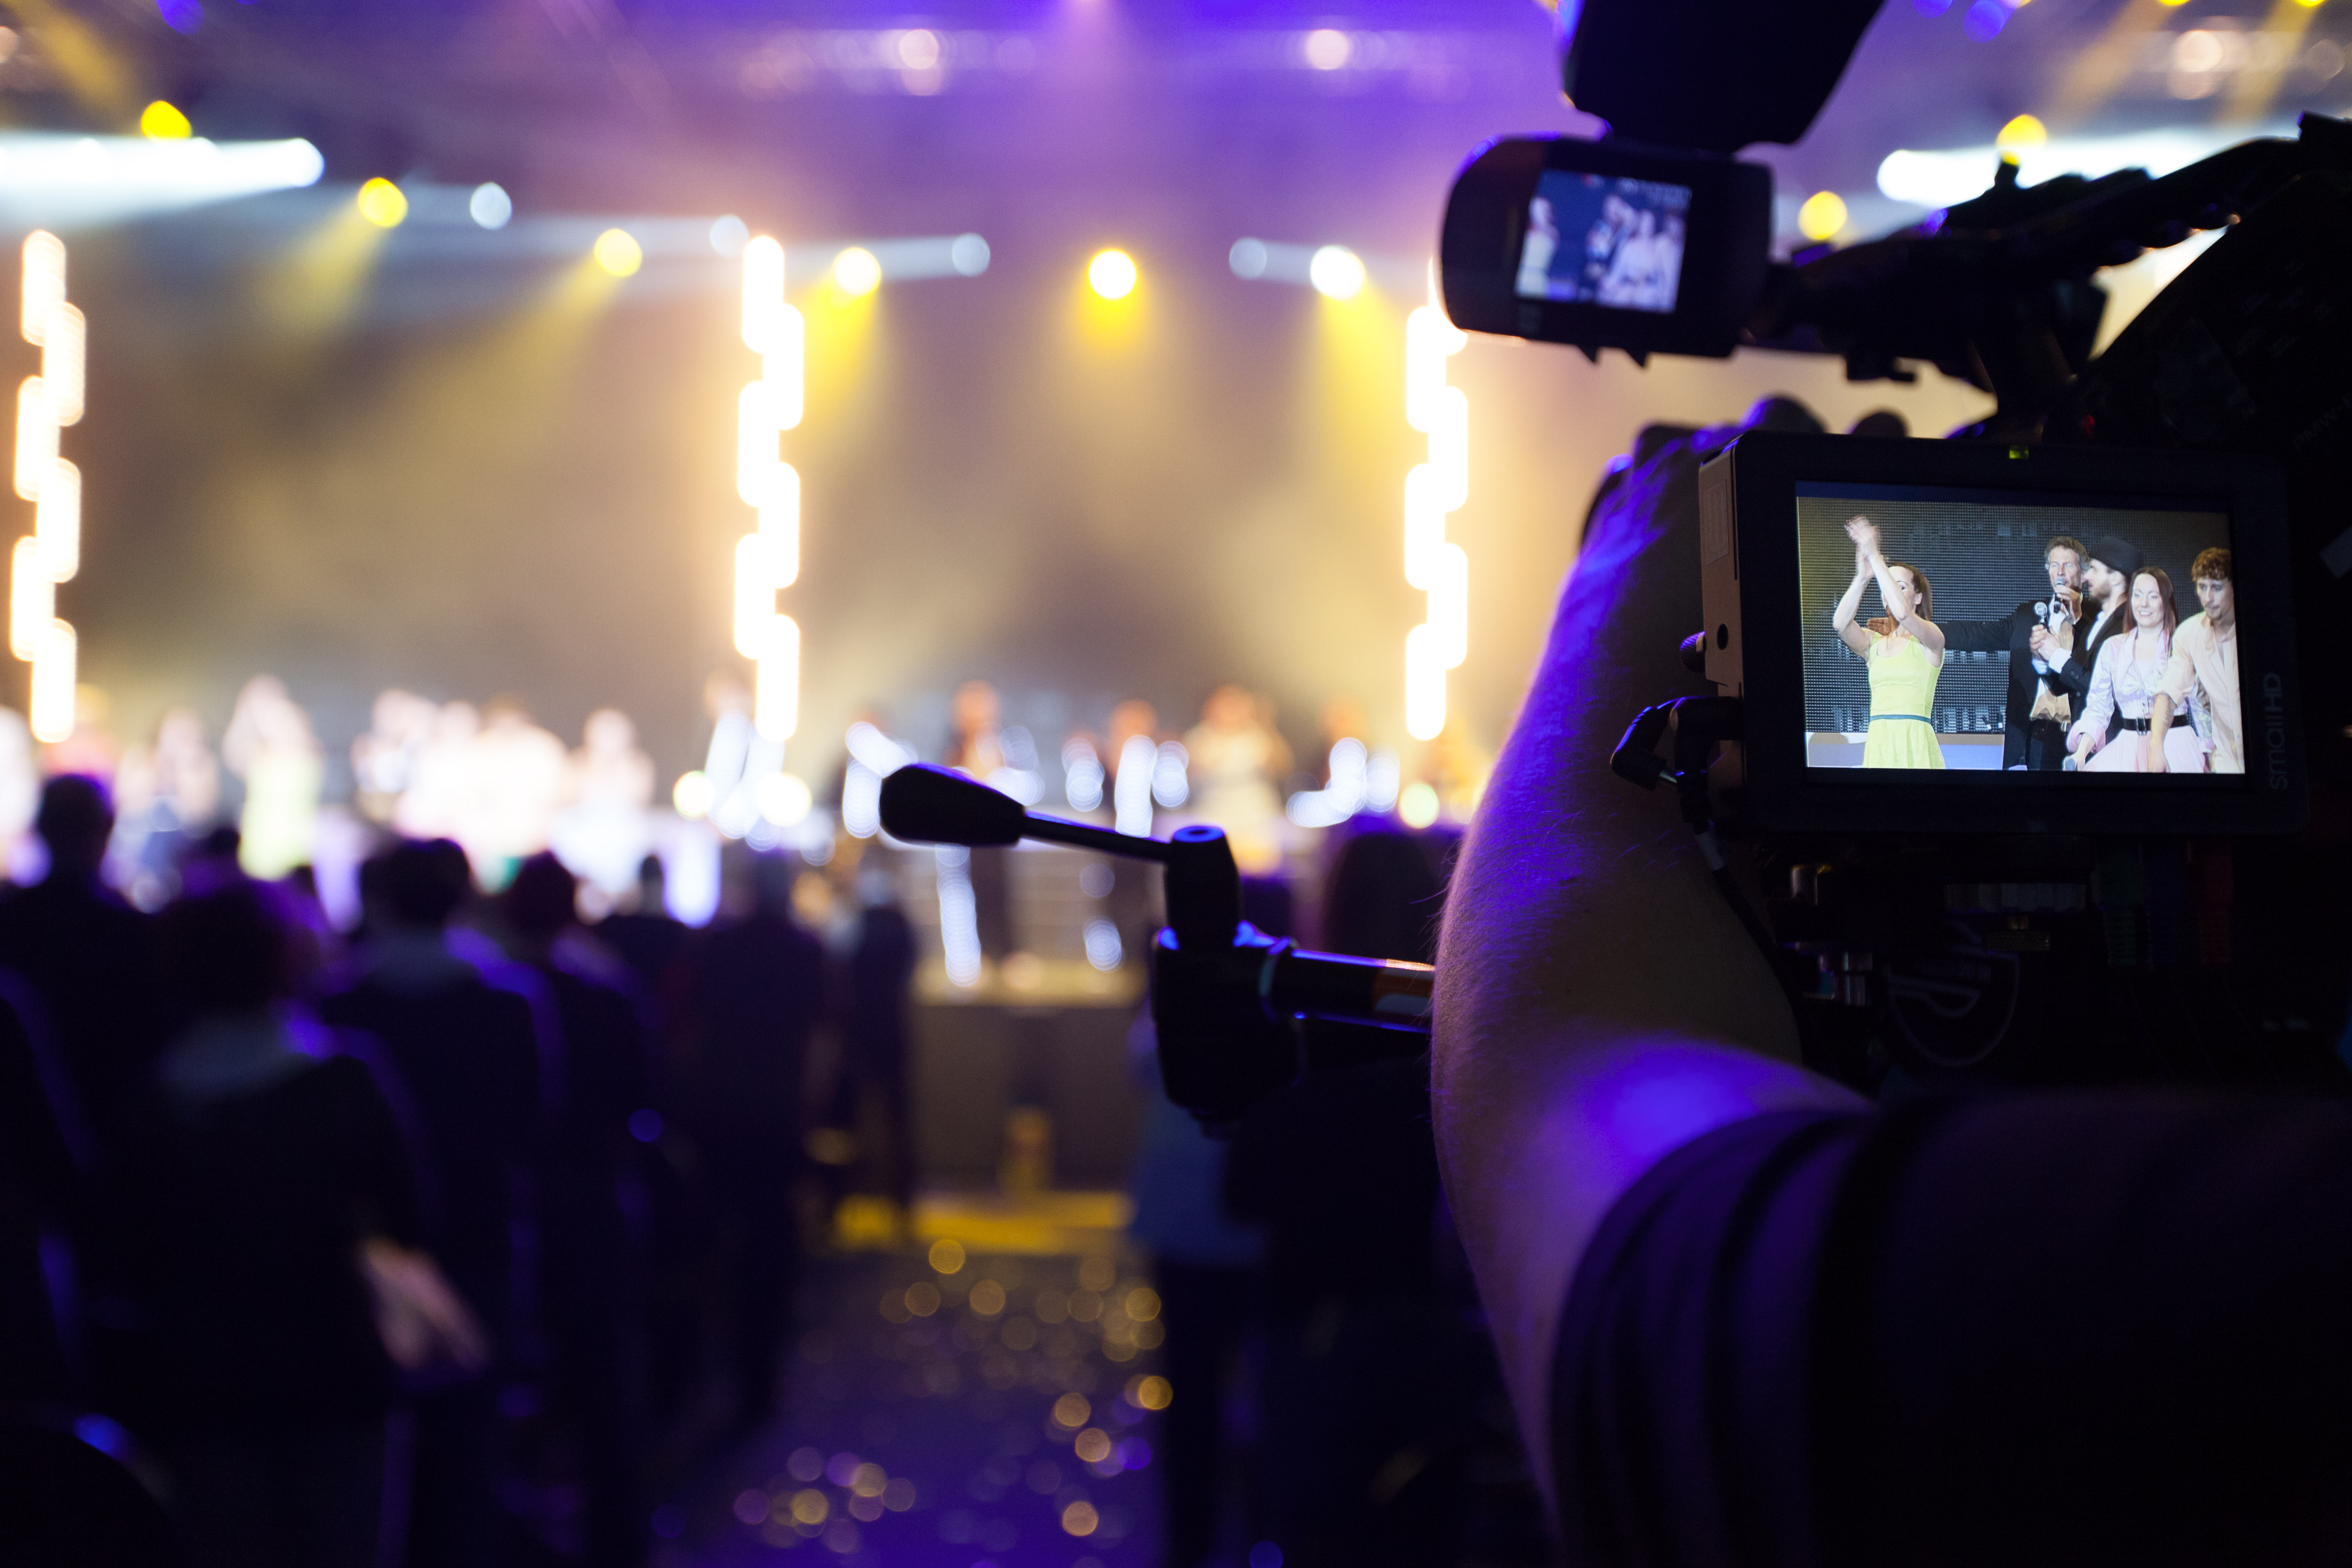 Presentations – How to end a “video-guy’s” agony in 8 easy steps